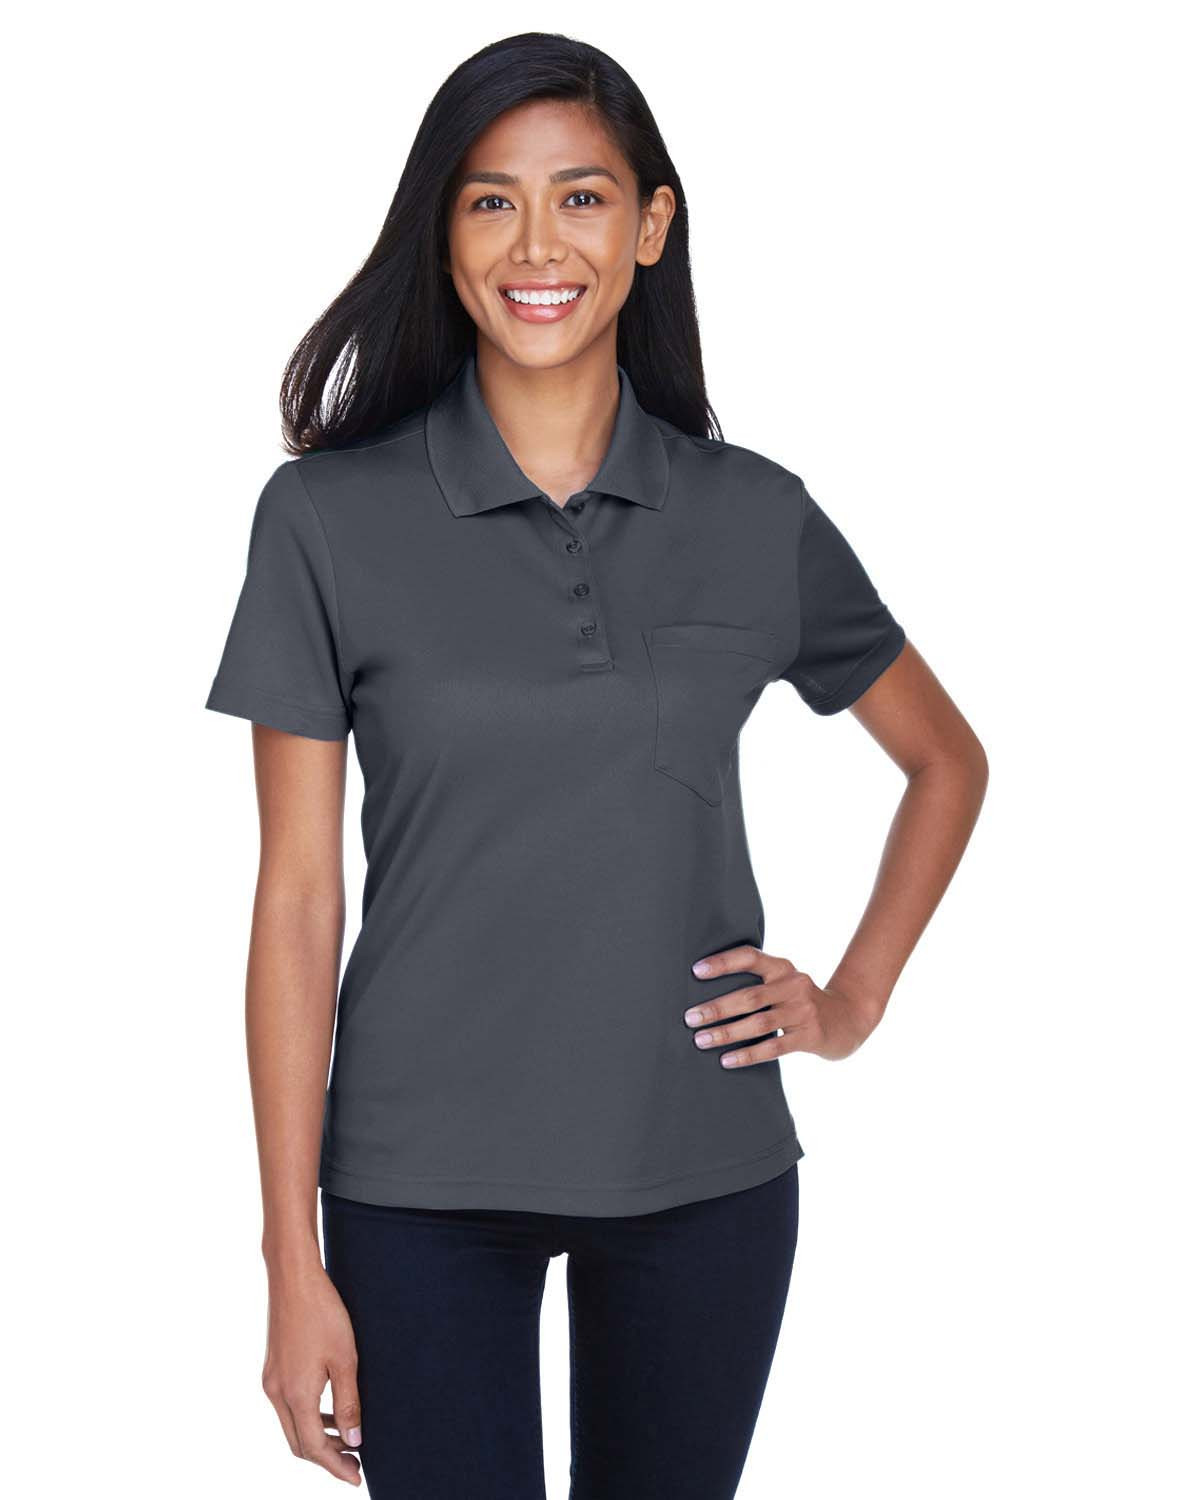 Women's Loose Fit Flowy Piqué Polo - Women's Polo Shirts - New In